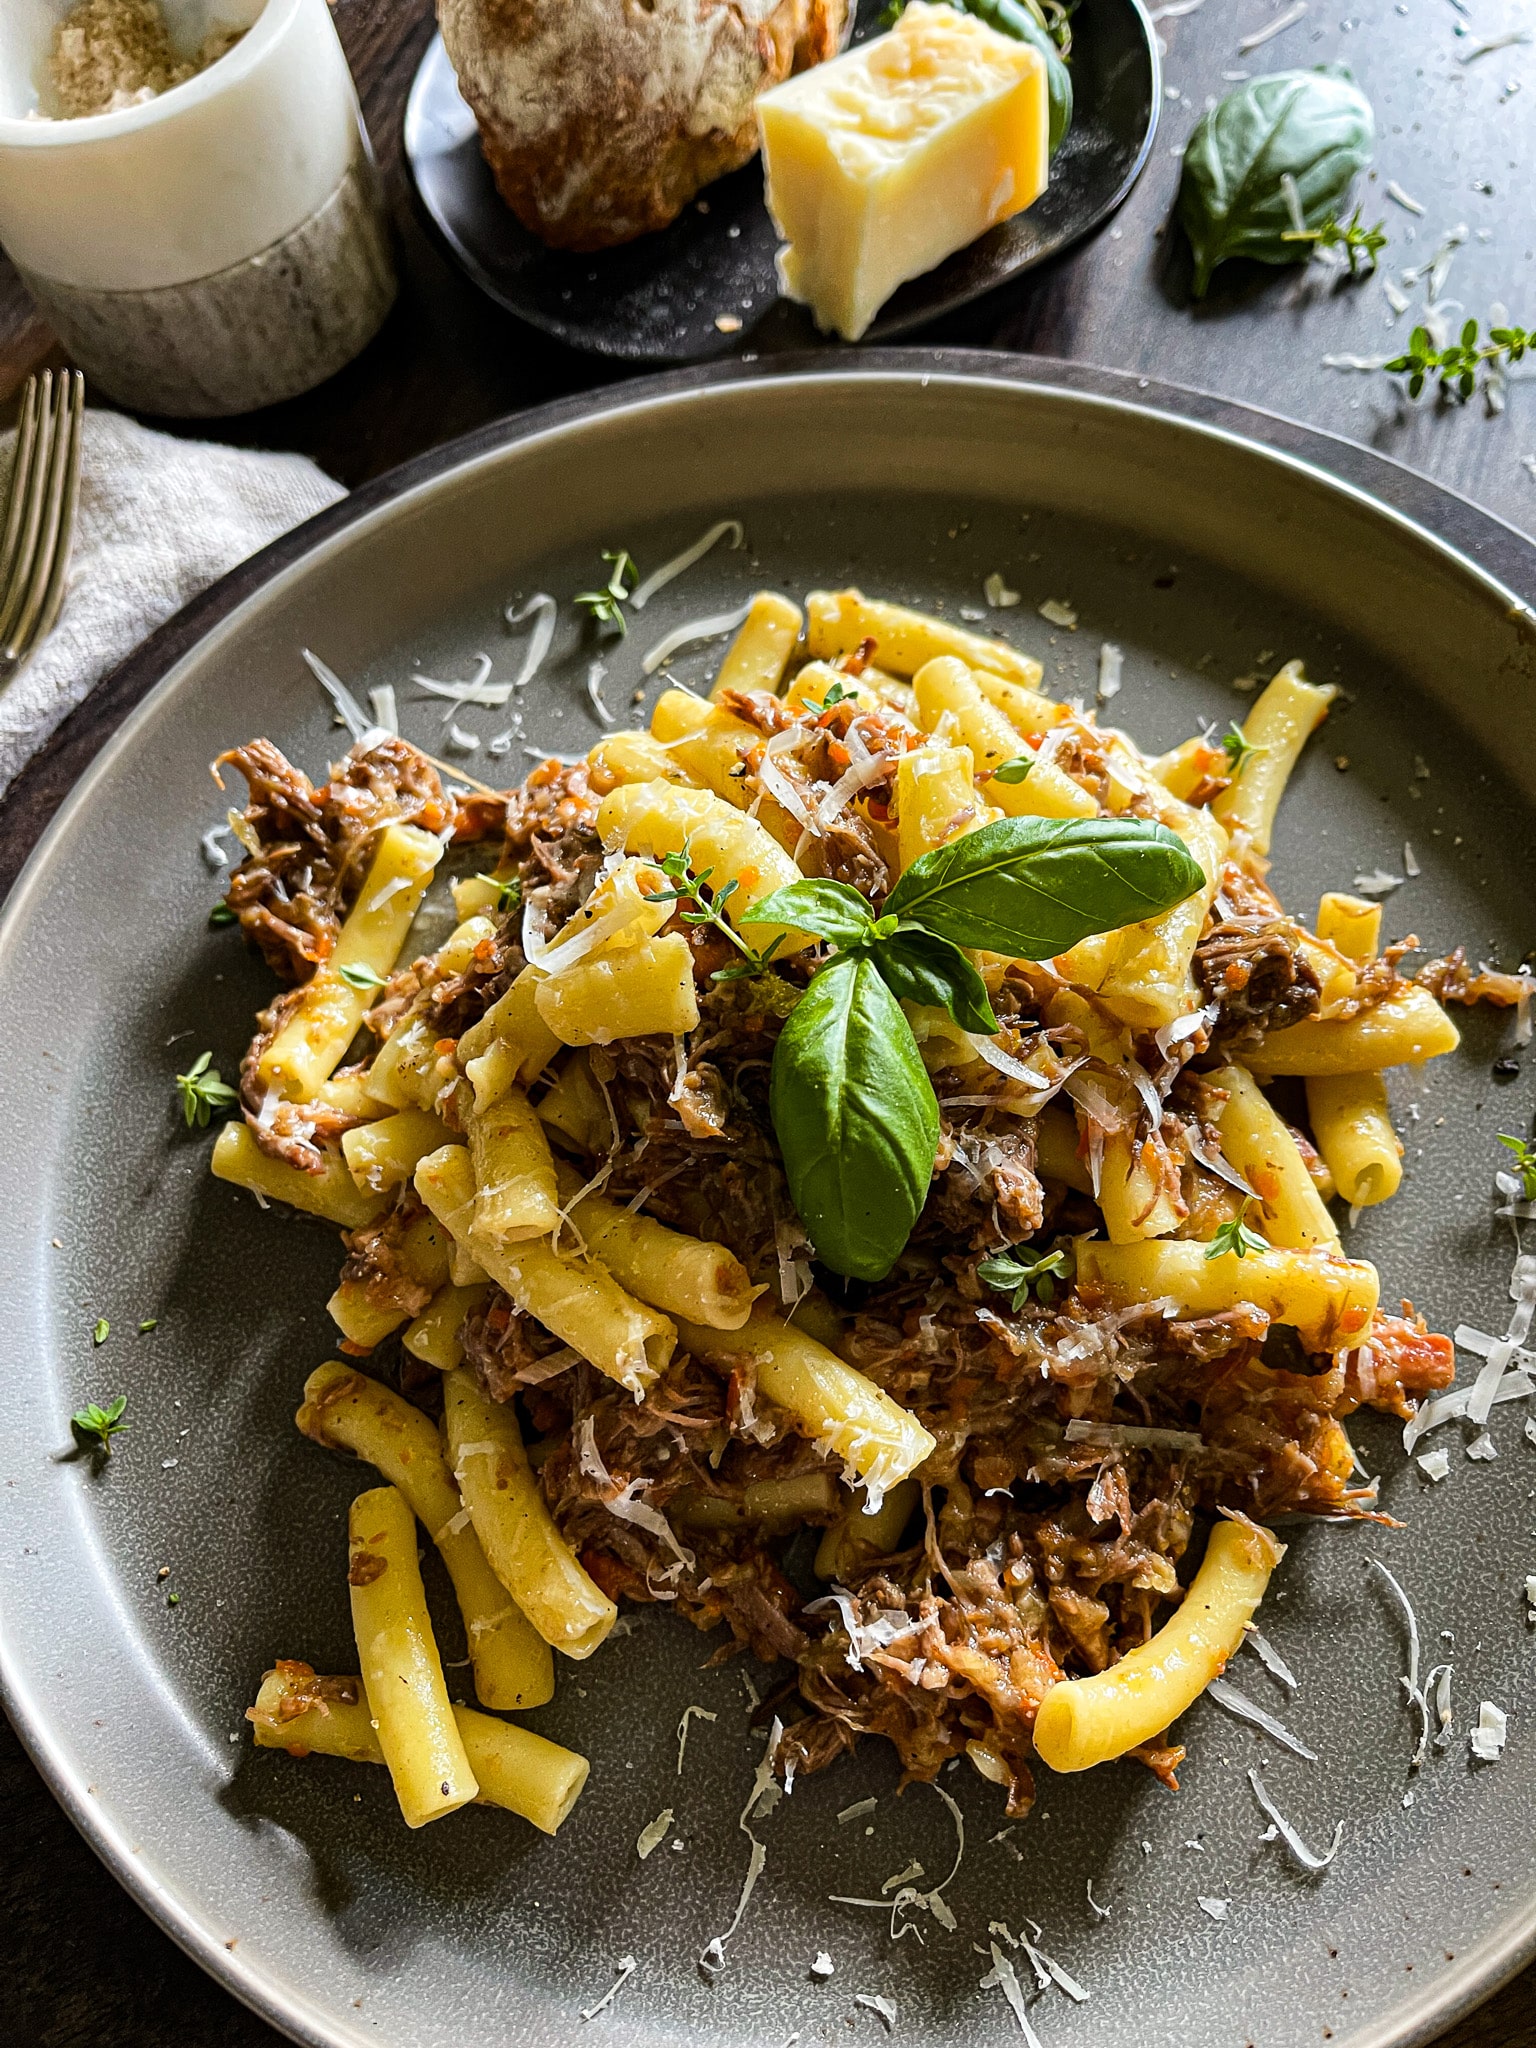 pasta alla genovese - an onion and beef ragù served on a plate from a dutch oven, garnished with parmesan cheese and fresh herbs